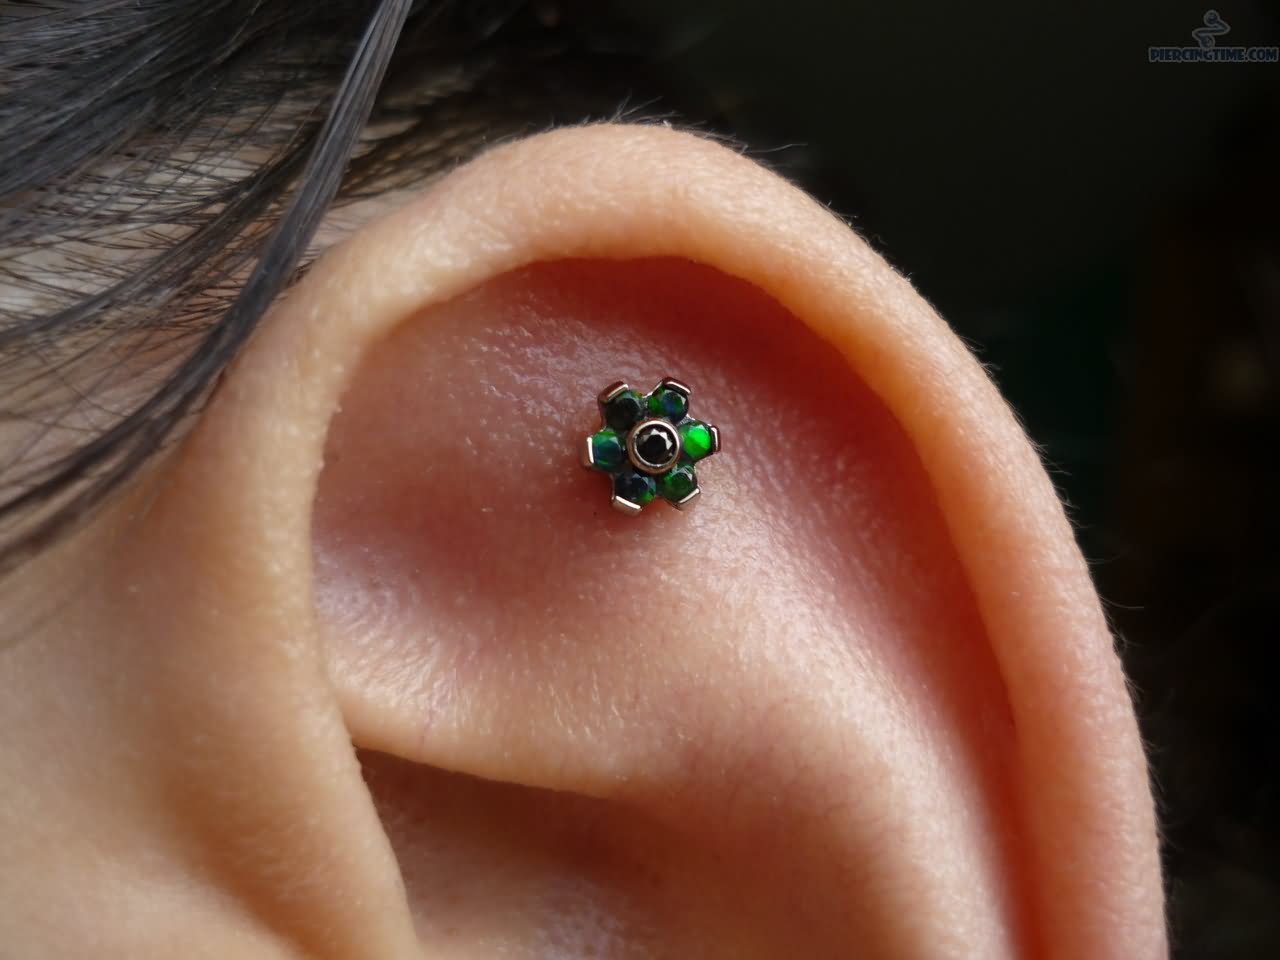 Cartilage Piercing With Green Flower Stud